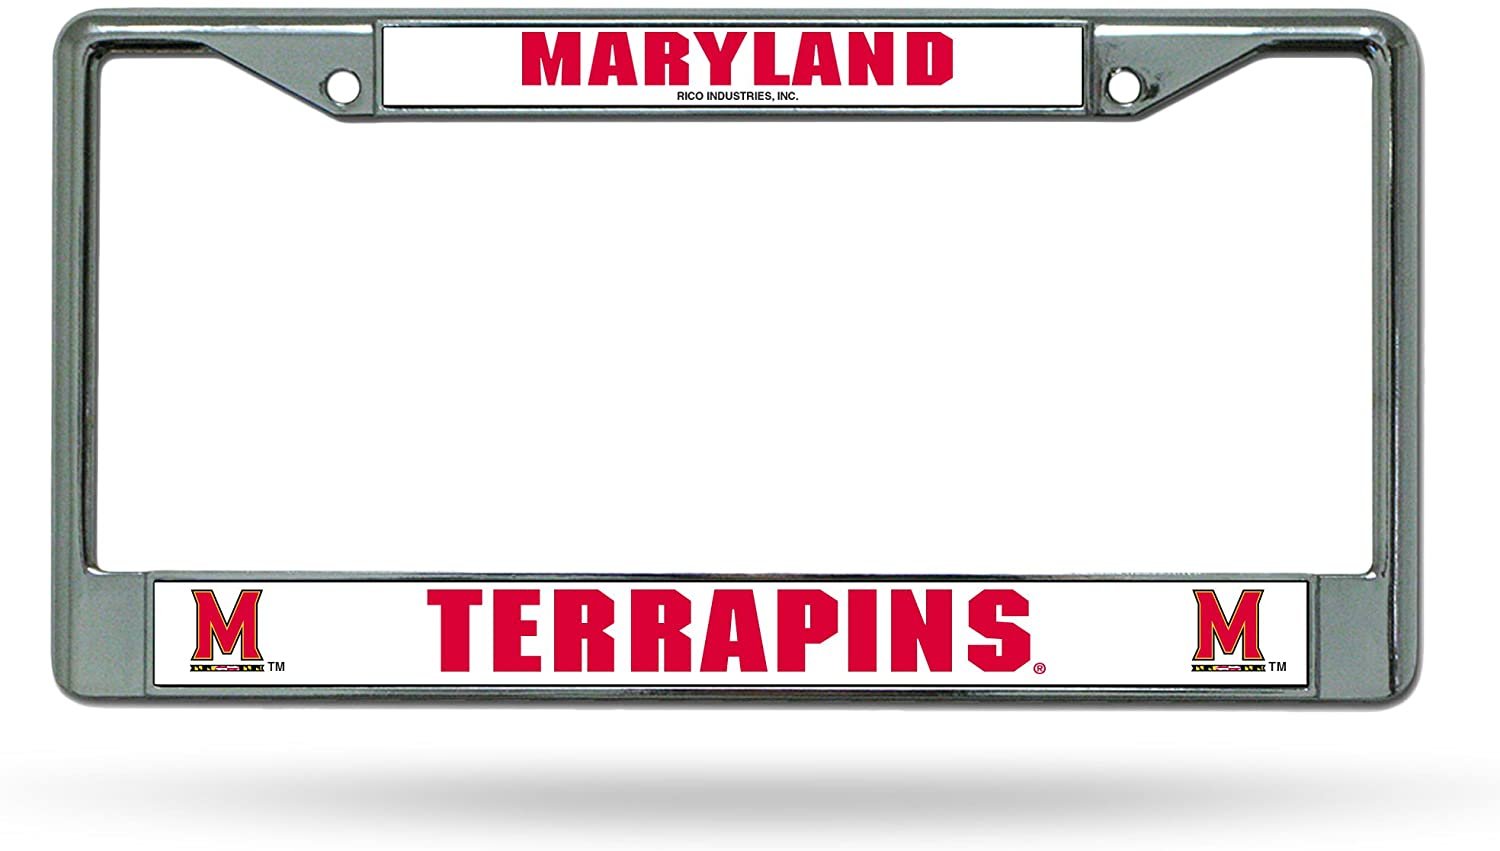 University of Maryland Terrapins Premium Metal License Plate Frame Chrome Tag Cover, 12x6 Inch